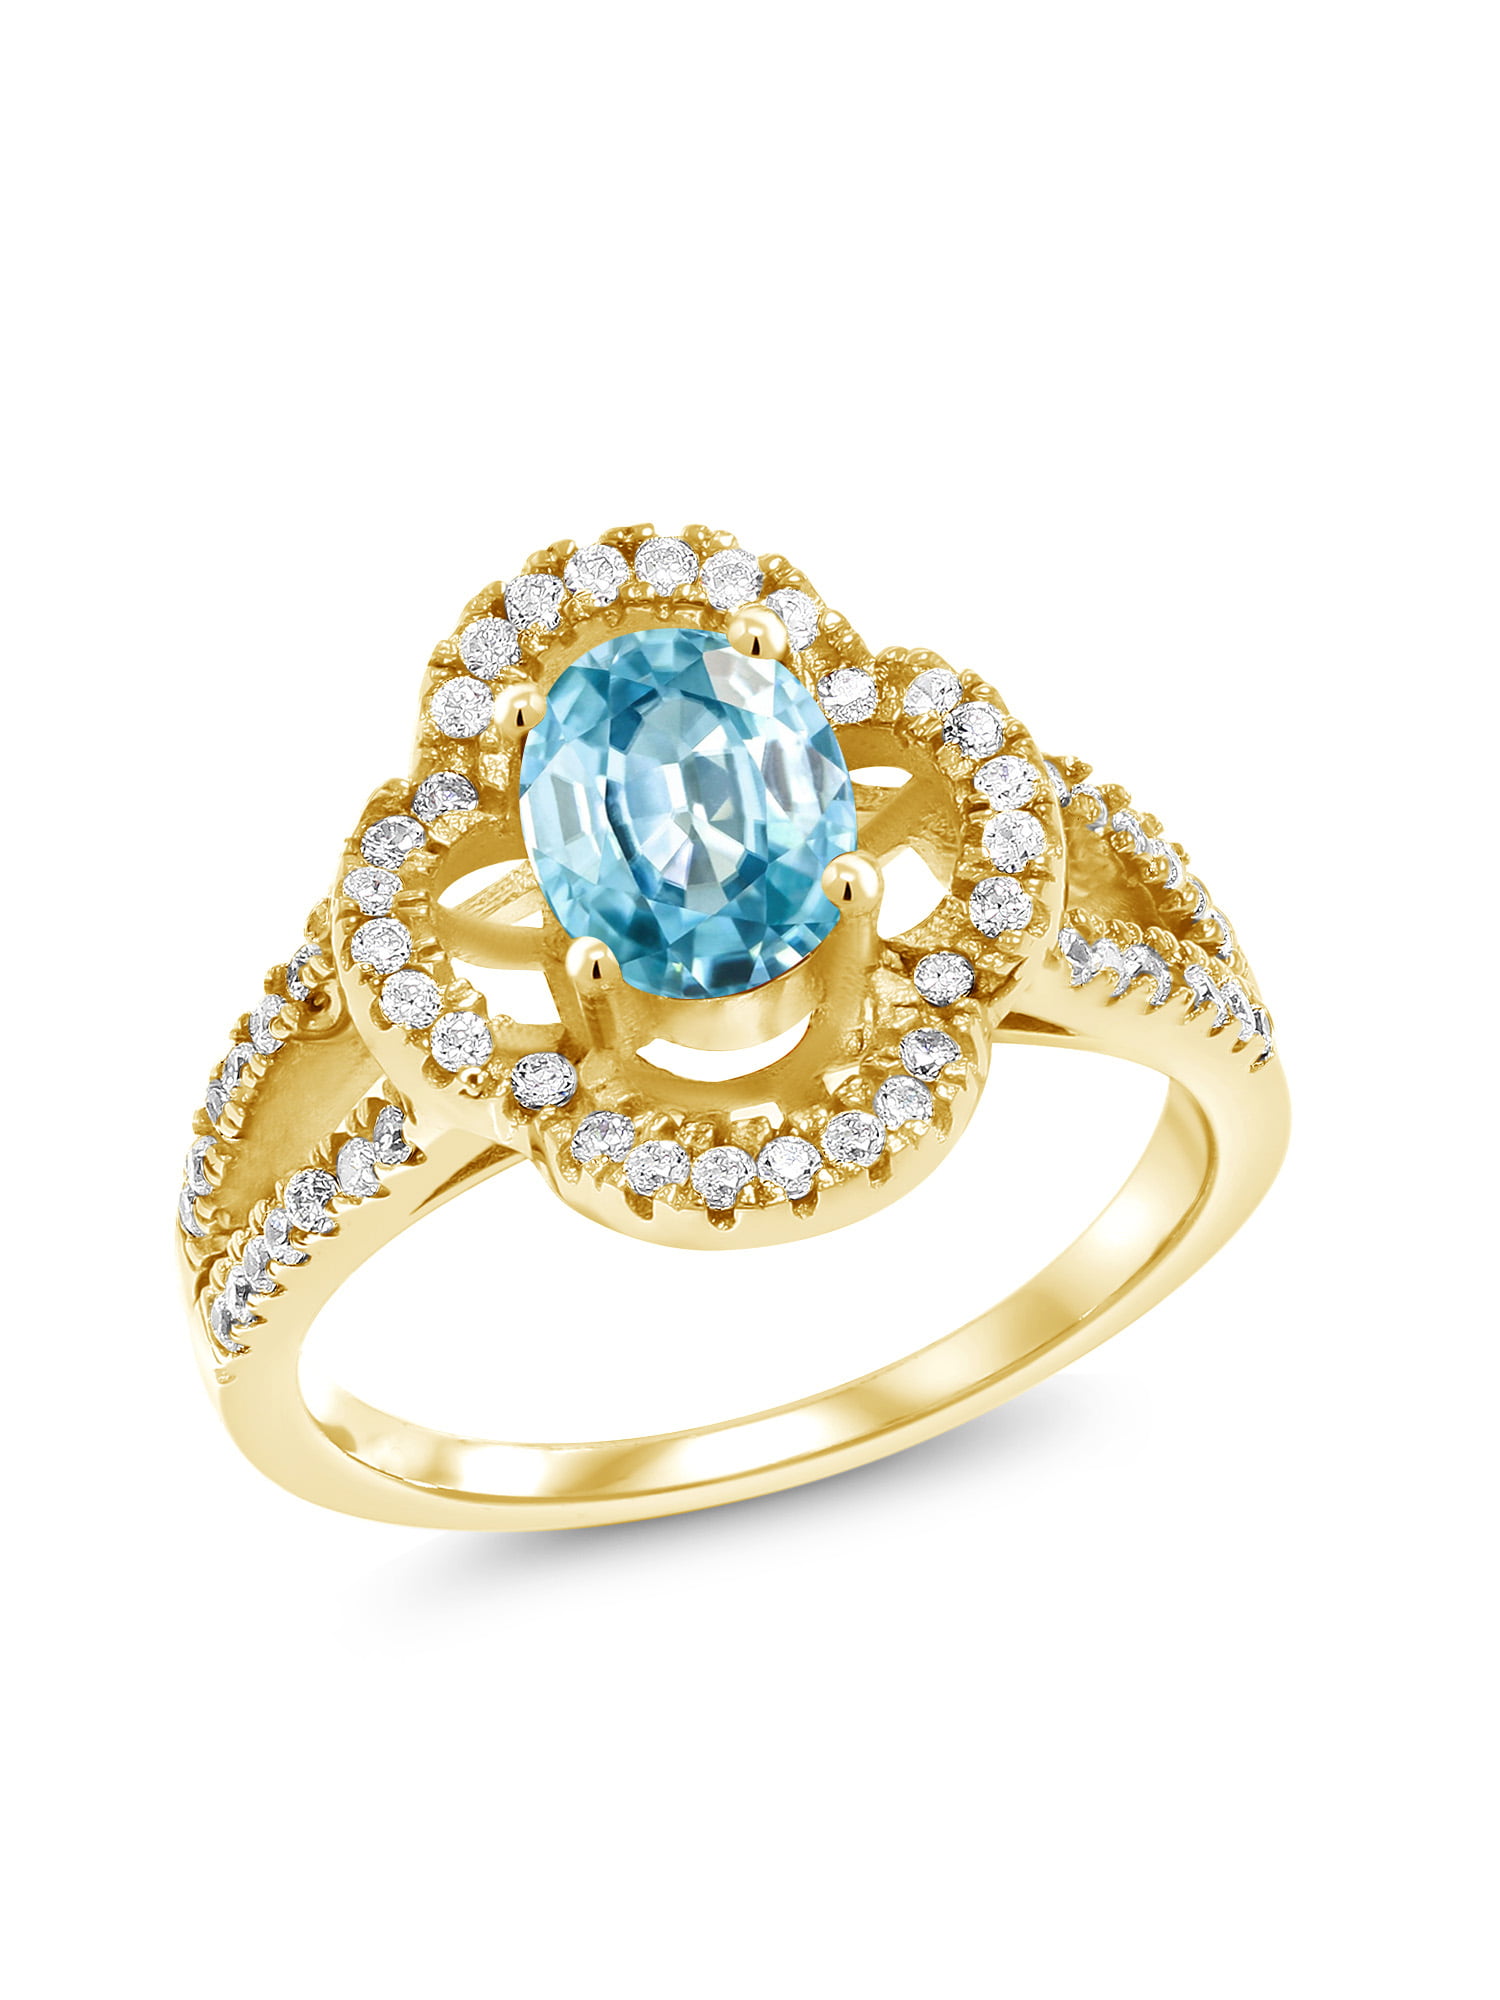 Gem Stone King 1.20 Ct Oval Blue Zircon 18K Yellow Gold Plated Silver Ring 